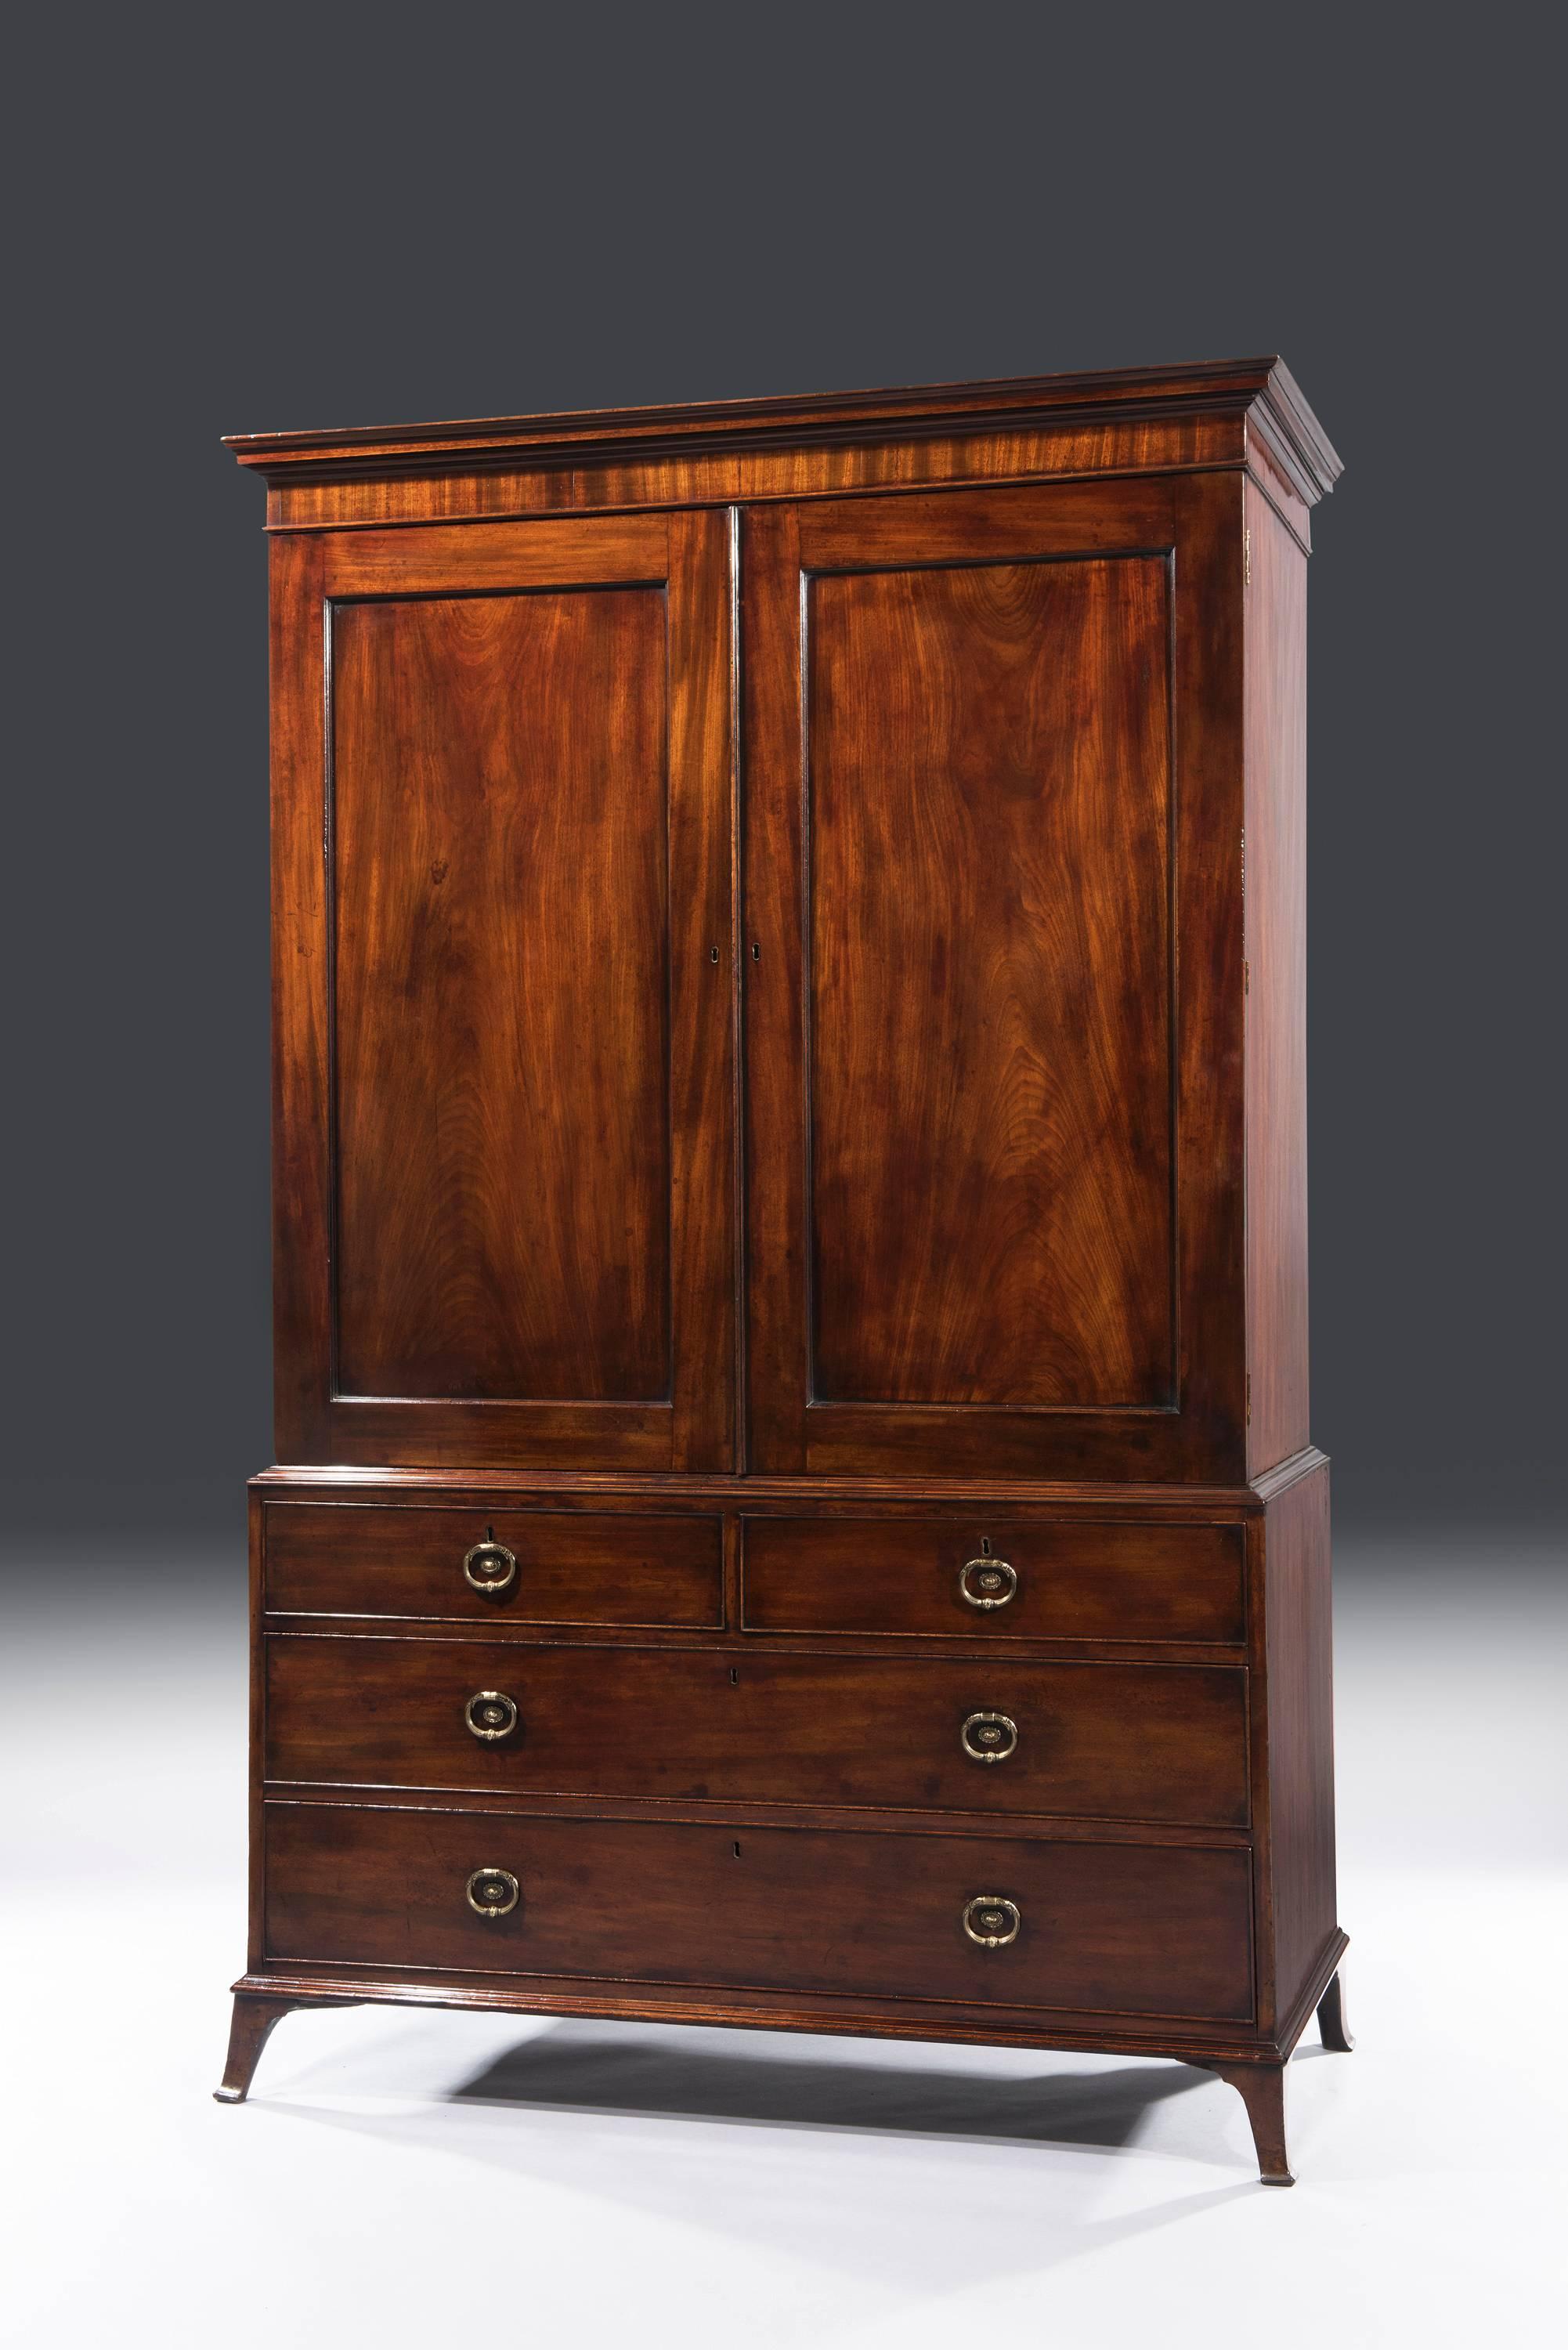 18th century George III Hepplewhite period mahogany linen press, stamped Gilllows of Lancaster. The linen press has solid mahogany moulding above two short and two long drawers that carry the original Gillow gilt brass oval shaped handles with